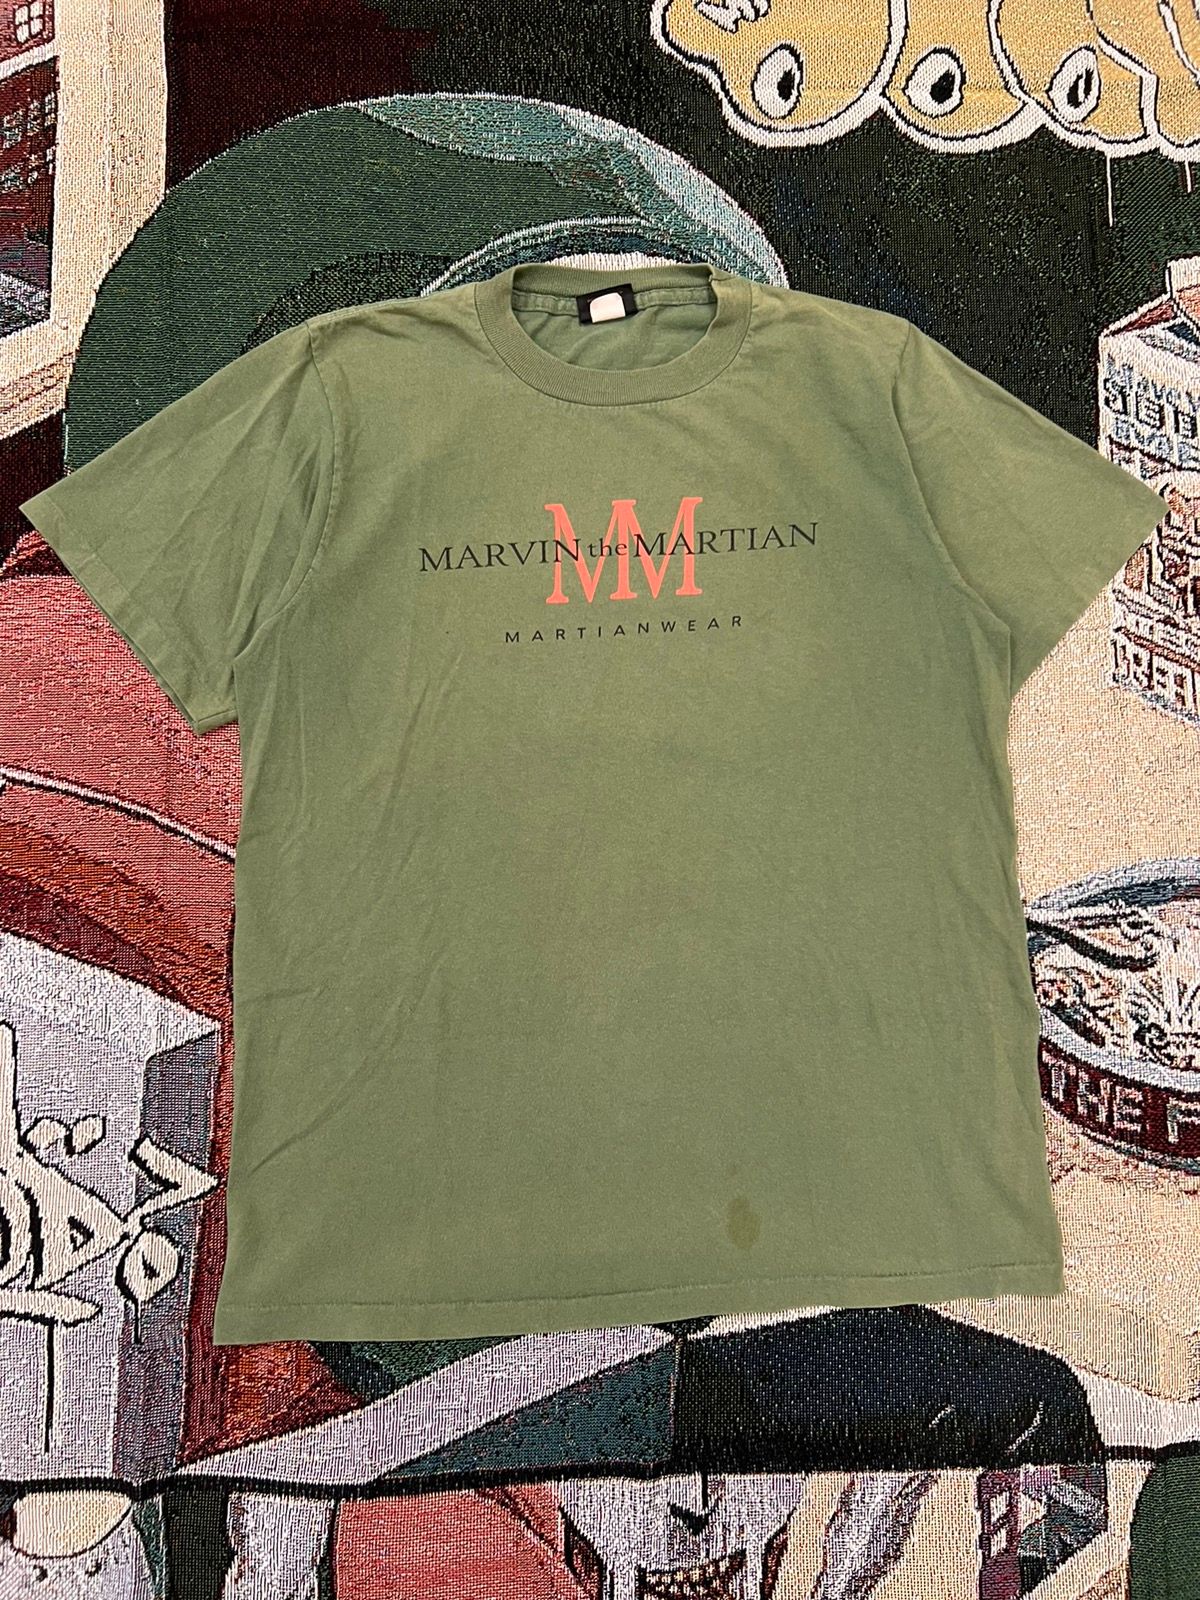 Vintage Marvin The Martian Changes Tee Green Size US L / EU 52-54 / 3 - 3 Thumbnail